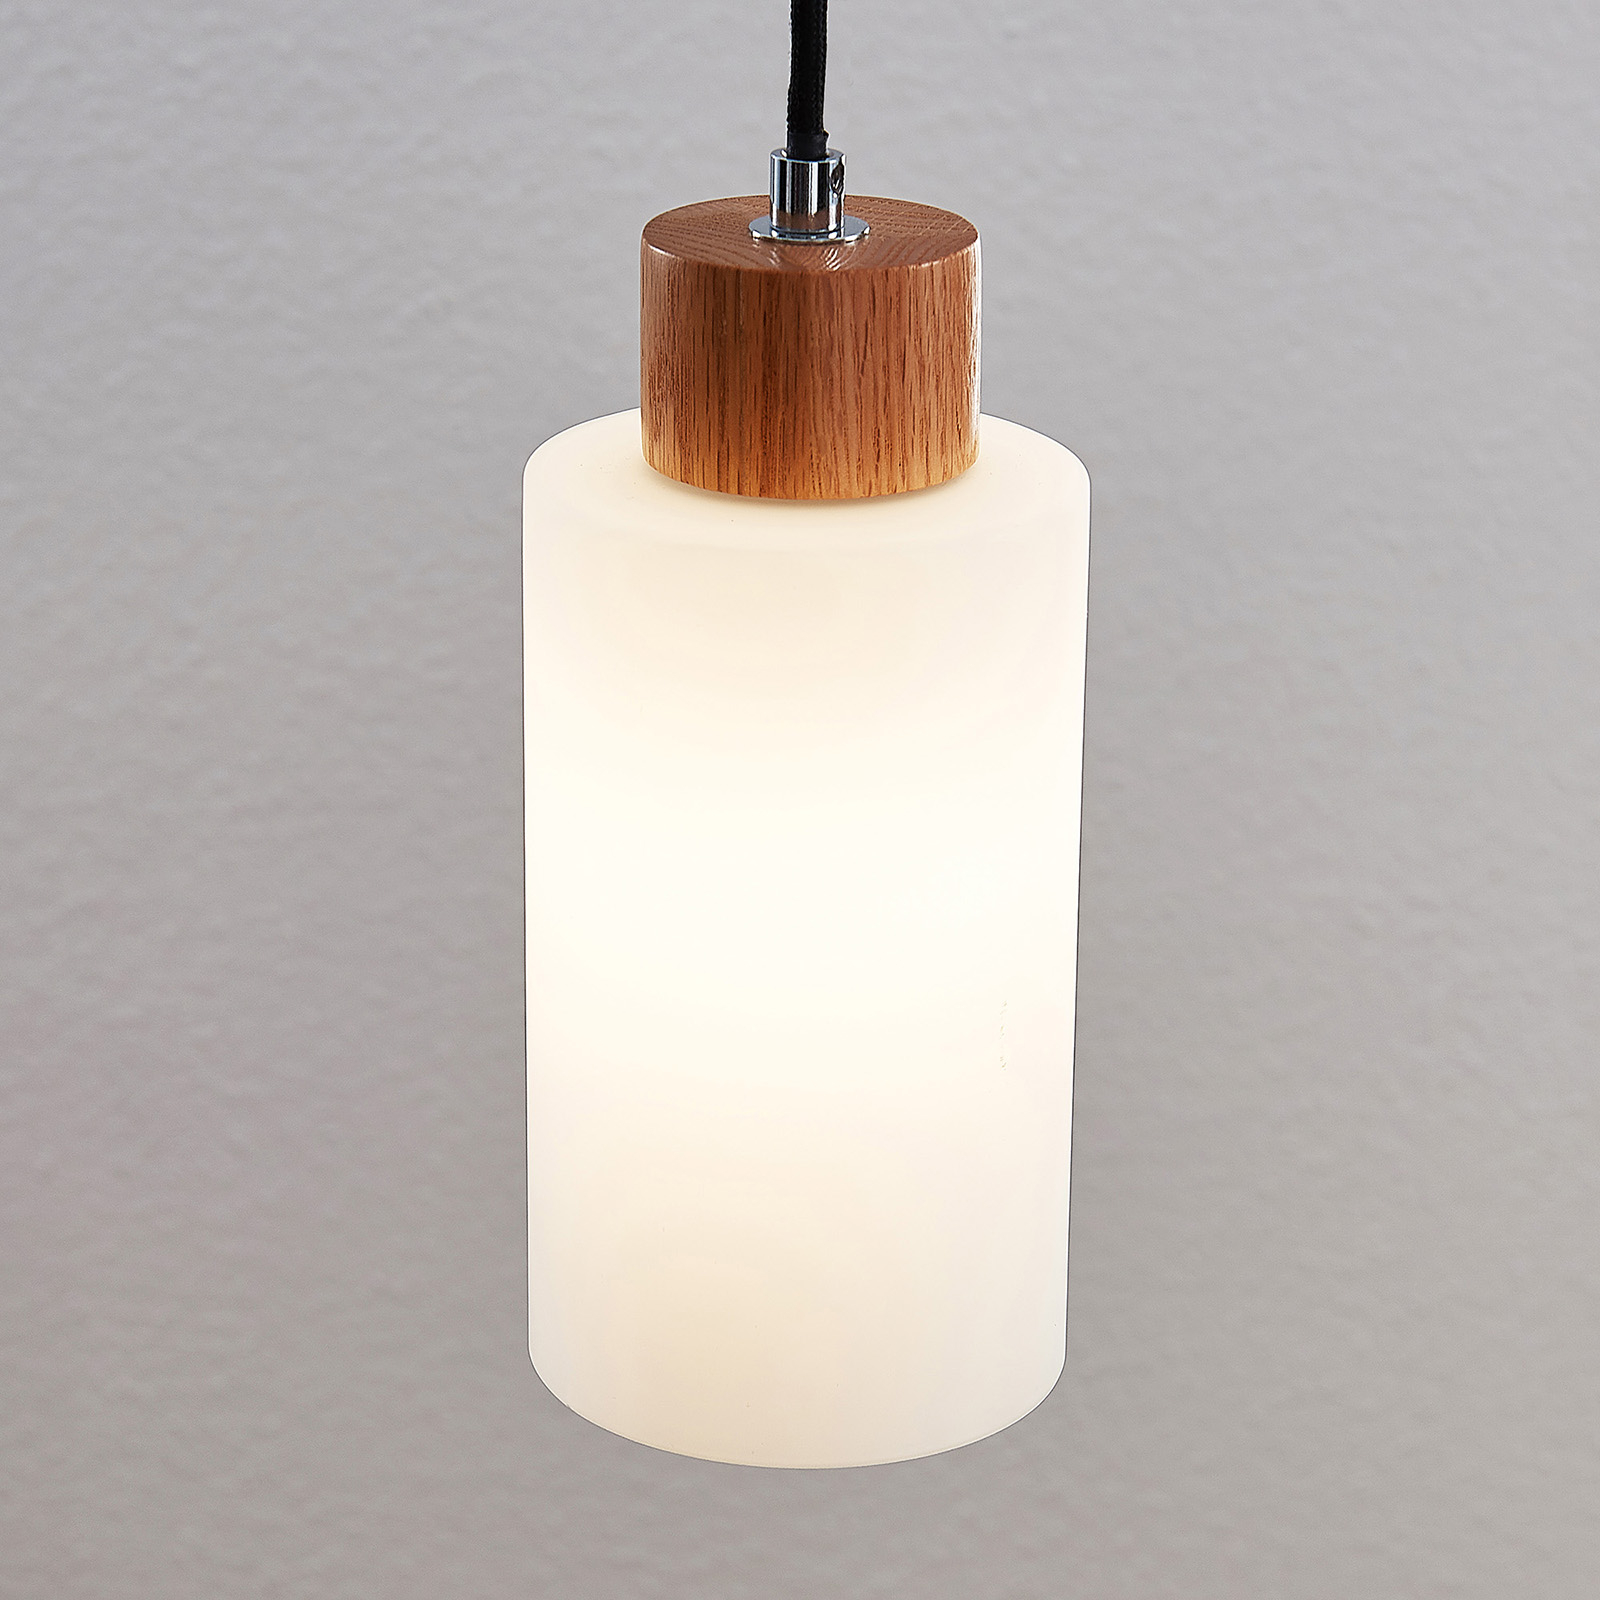 Lindby Nicus wooden hanging lamp, one-bulb